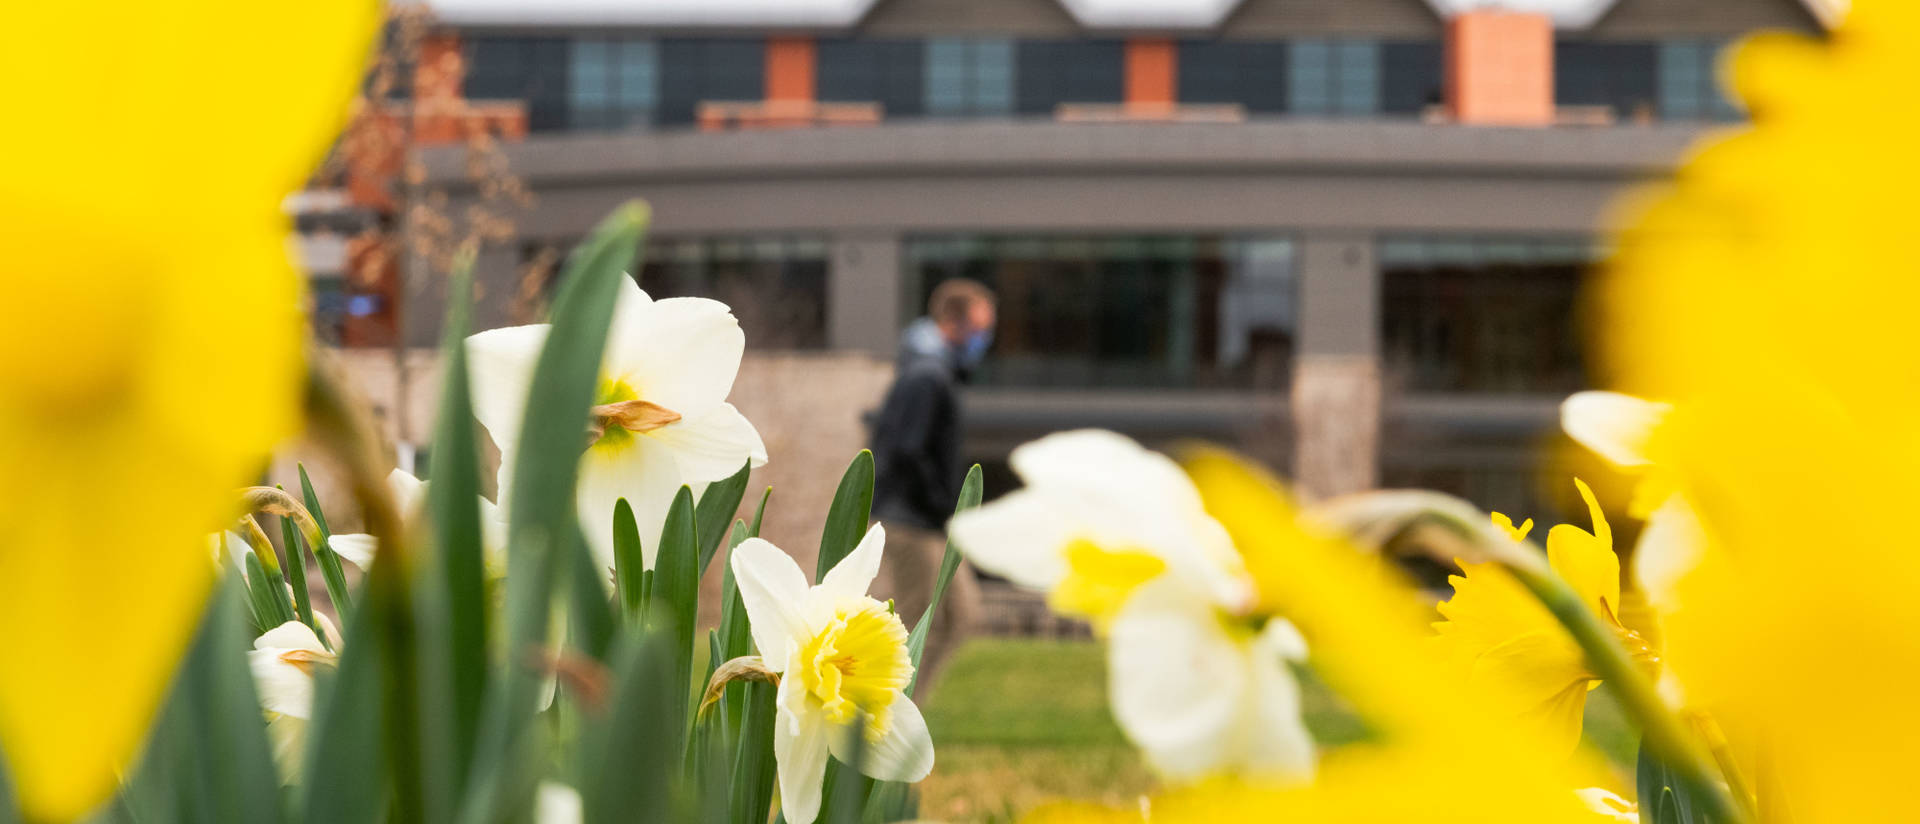 Daffodils with Davies Center in background